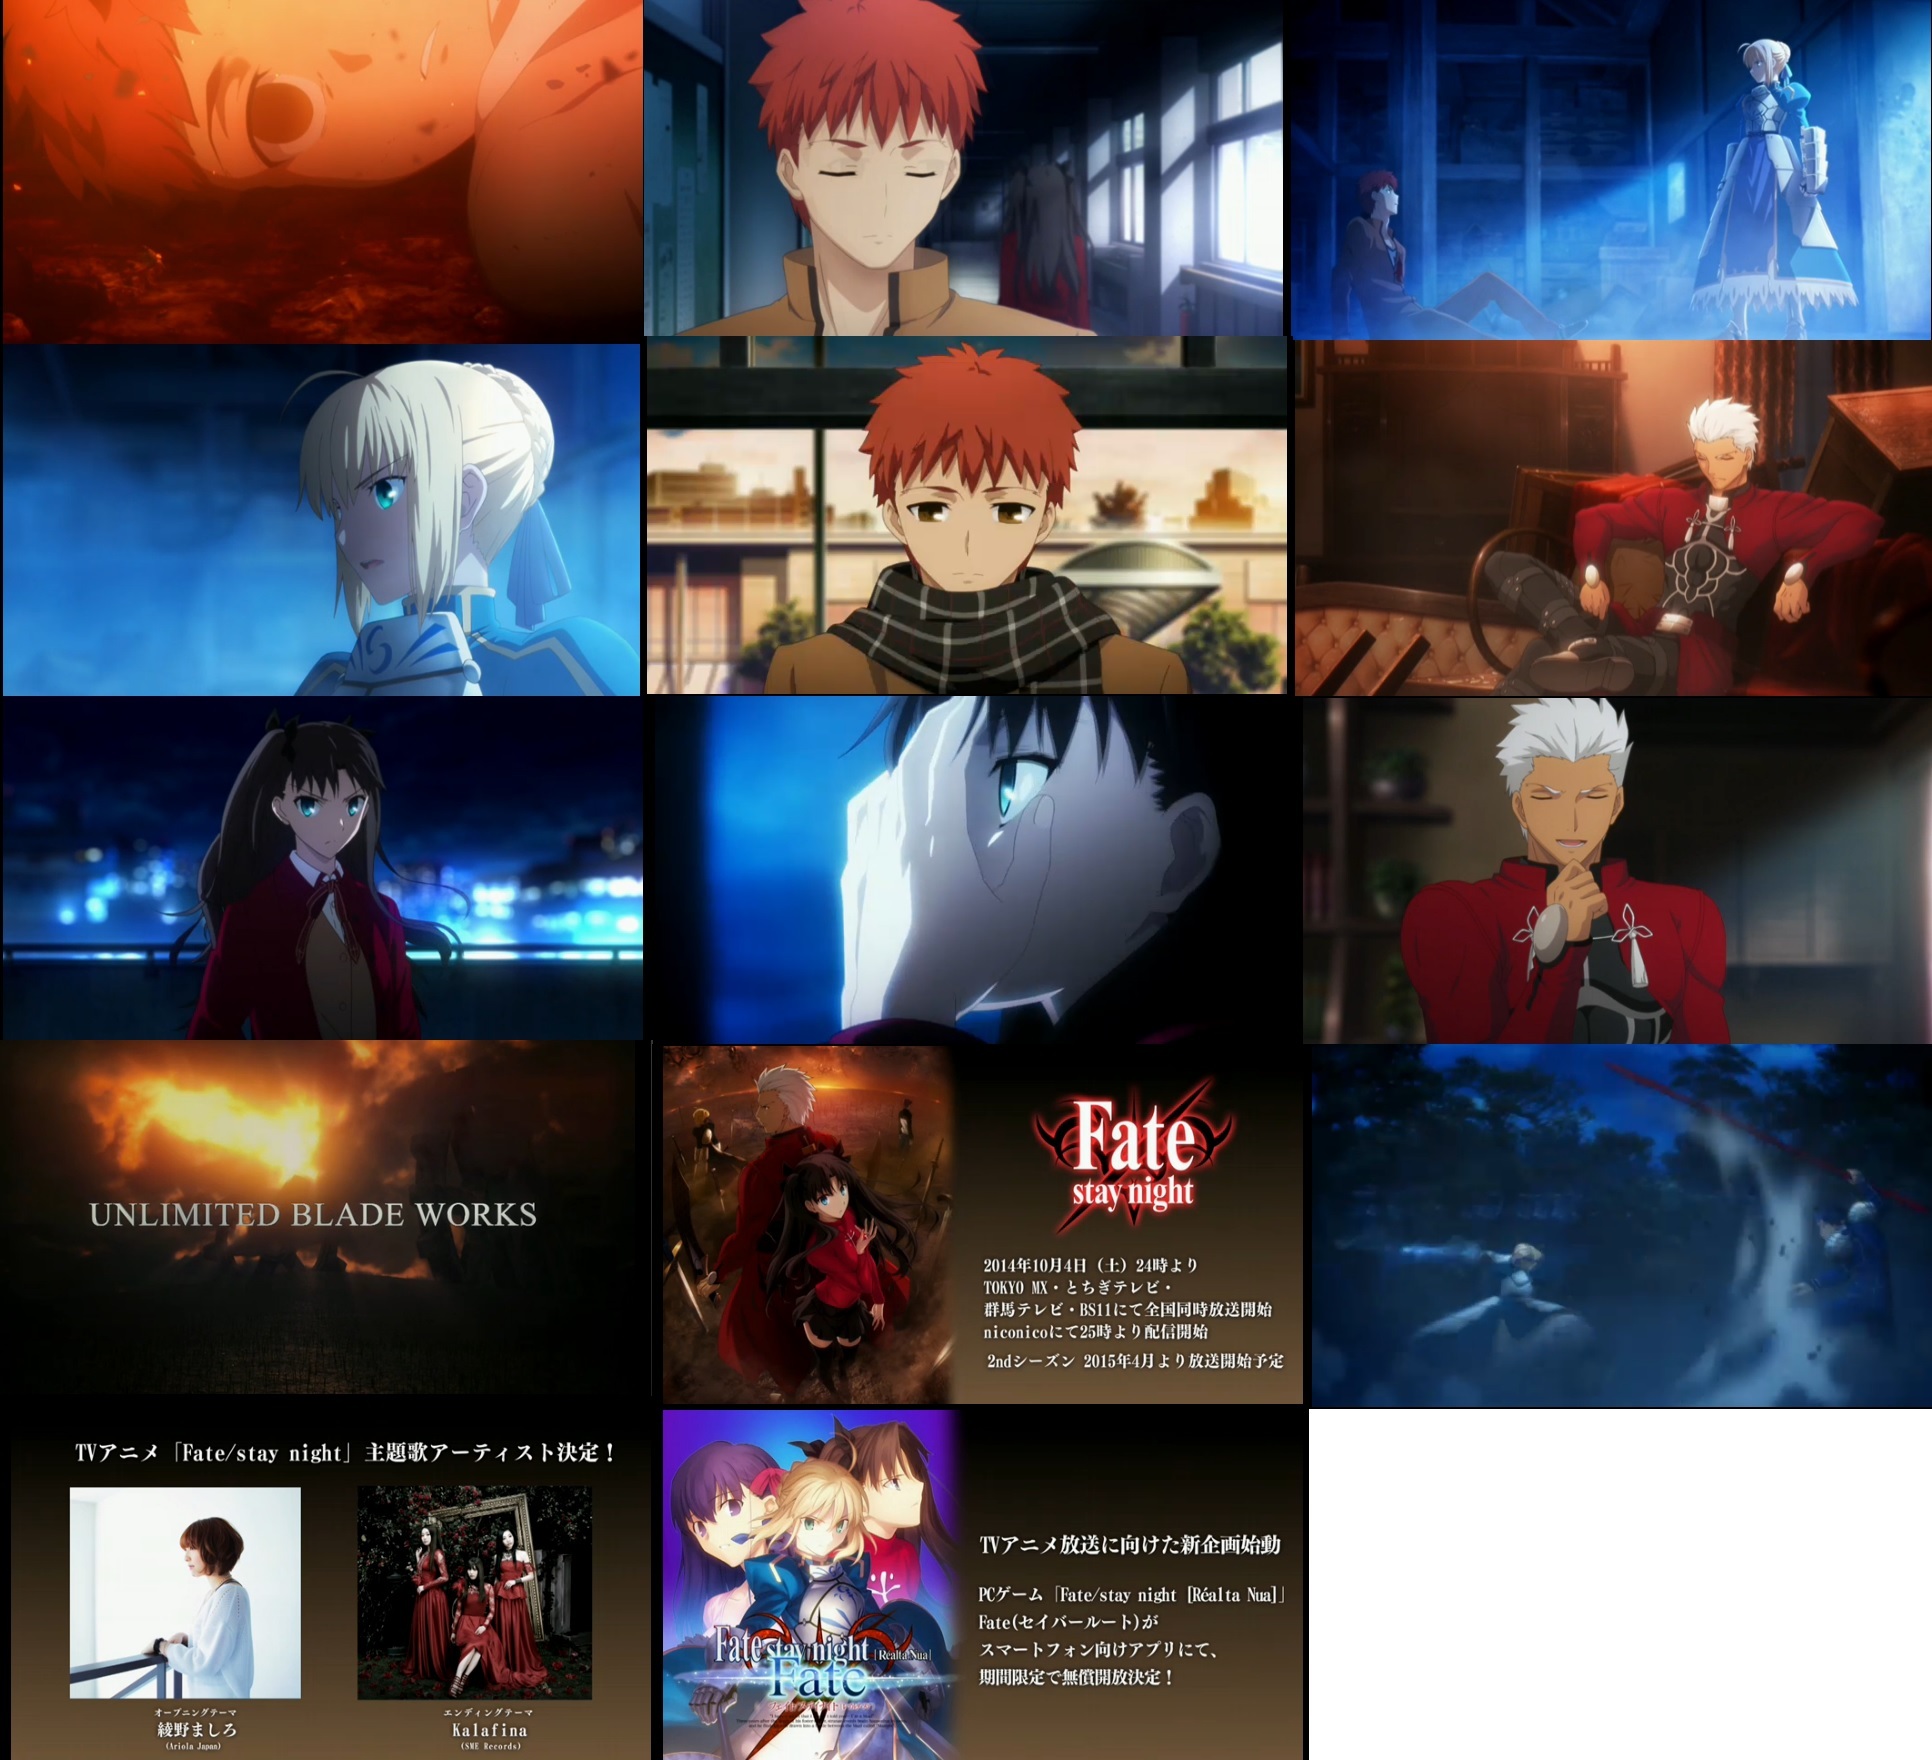 New Fate Stay Night By Ufotable Page 4 Canta Per Me Net Forums